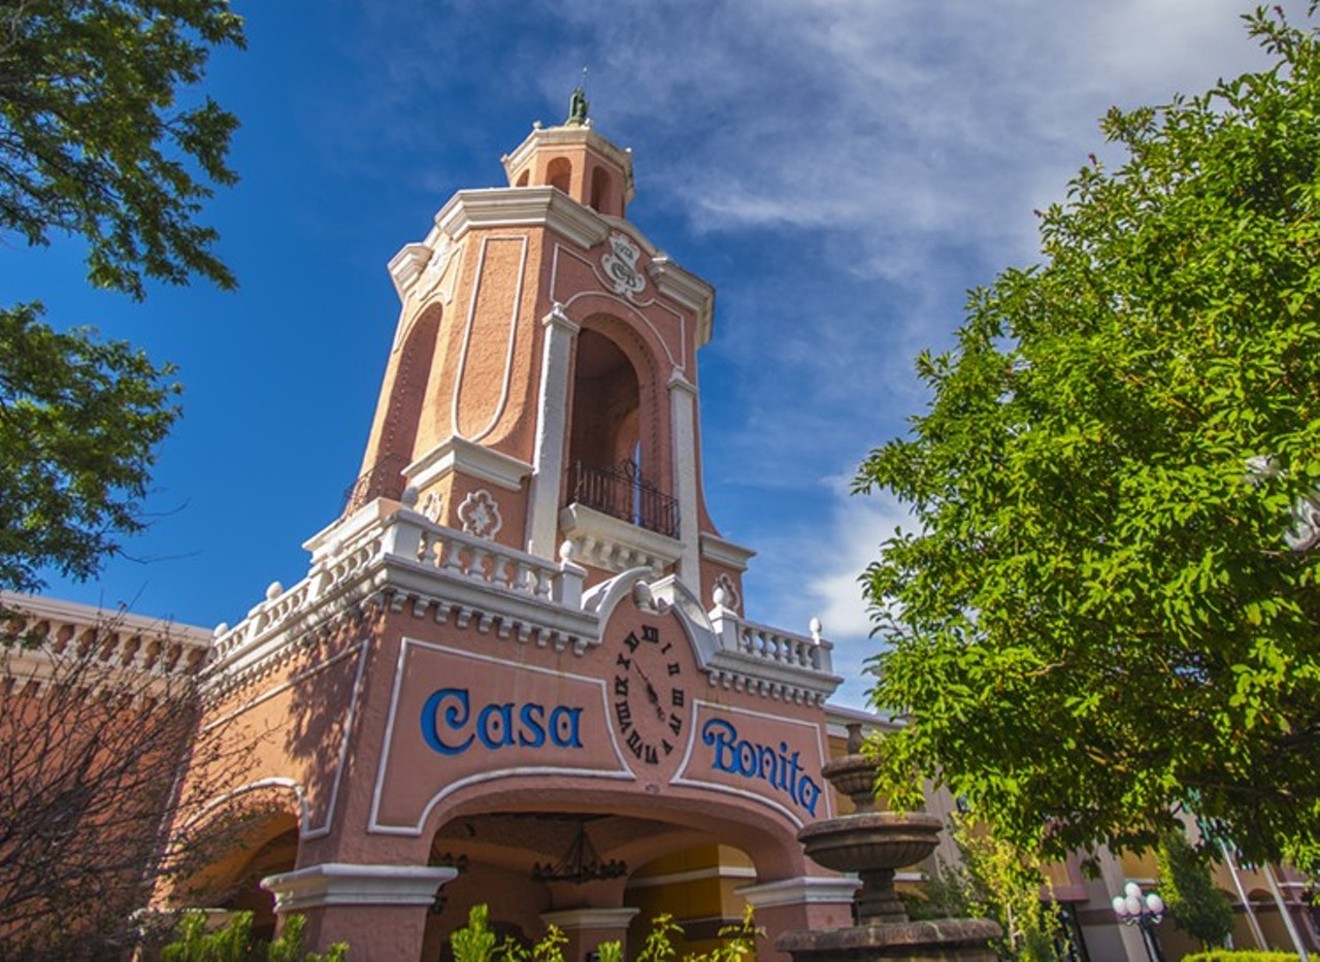 Casa Bonita has been a towering pink presence on West Colfax for nearly five decades.